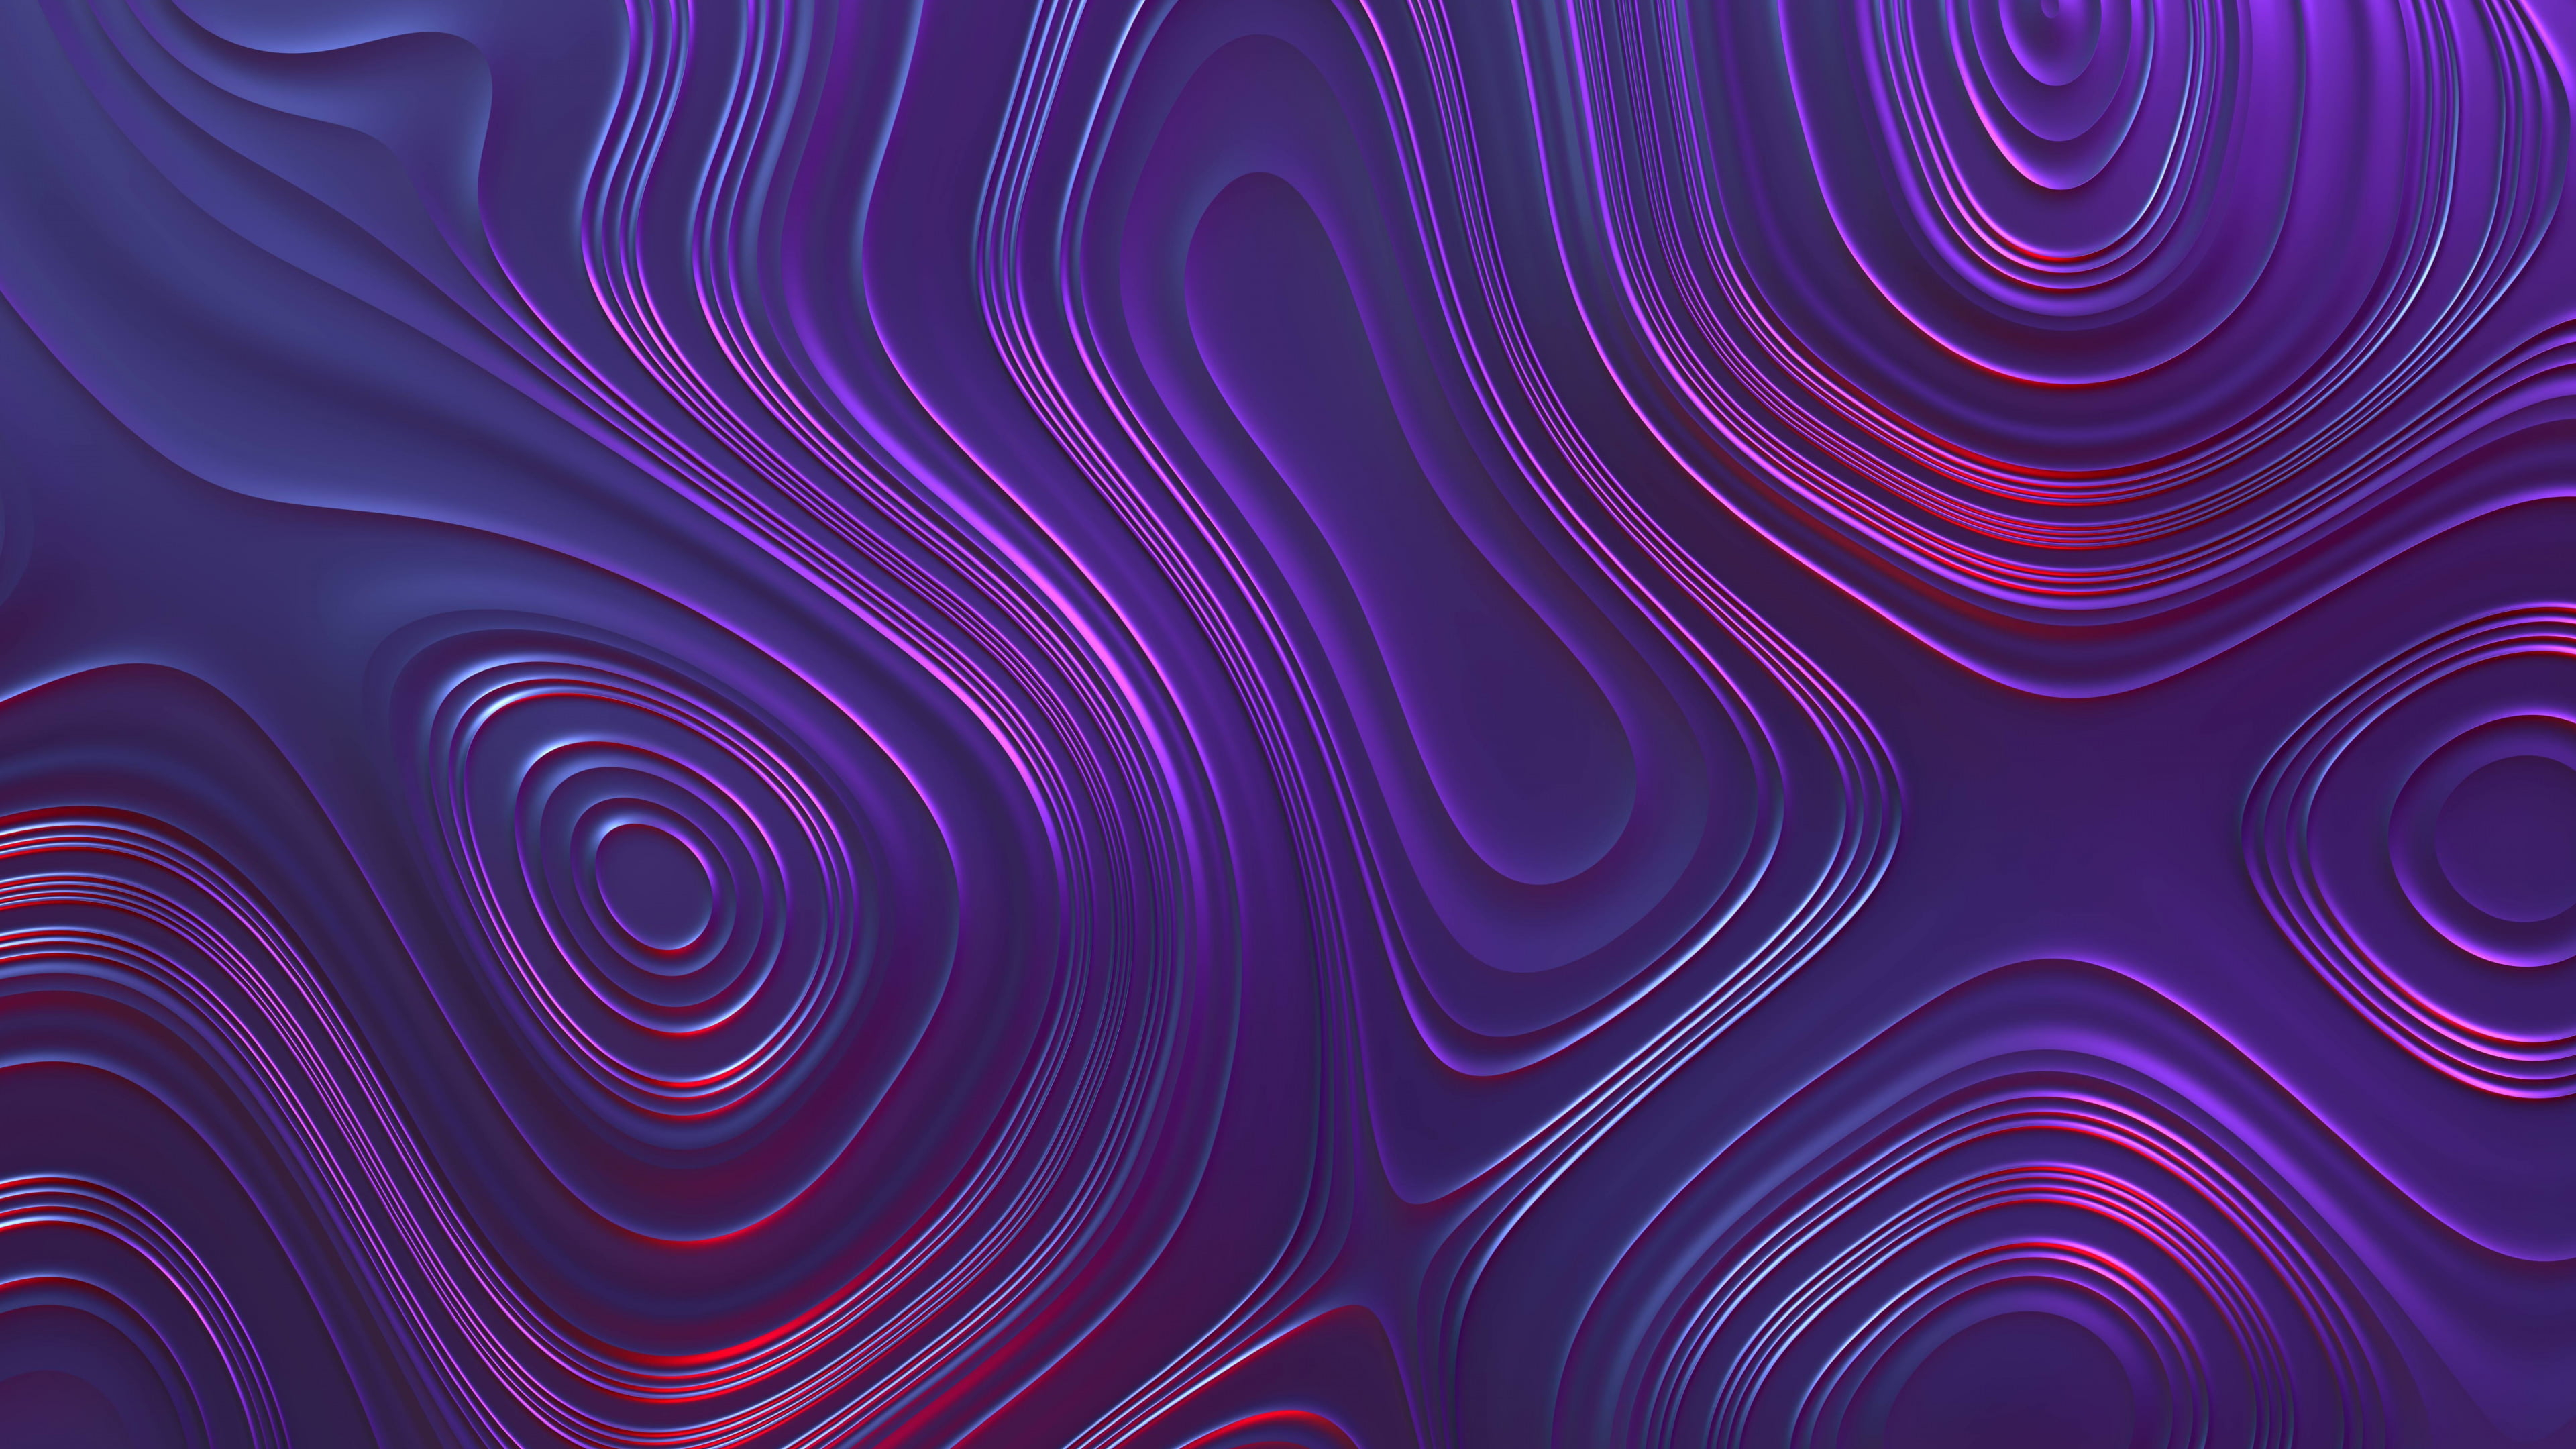 3840x2160 Purple and red abstract painting, abstract, wavy lines, swirl, swirls HD wallpaper